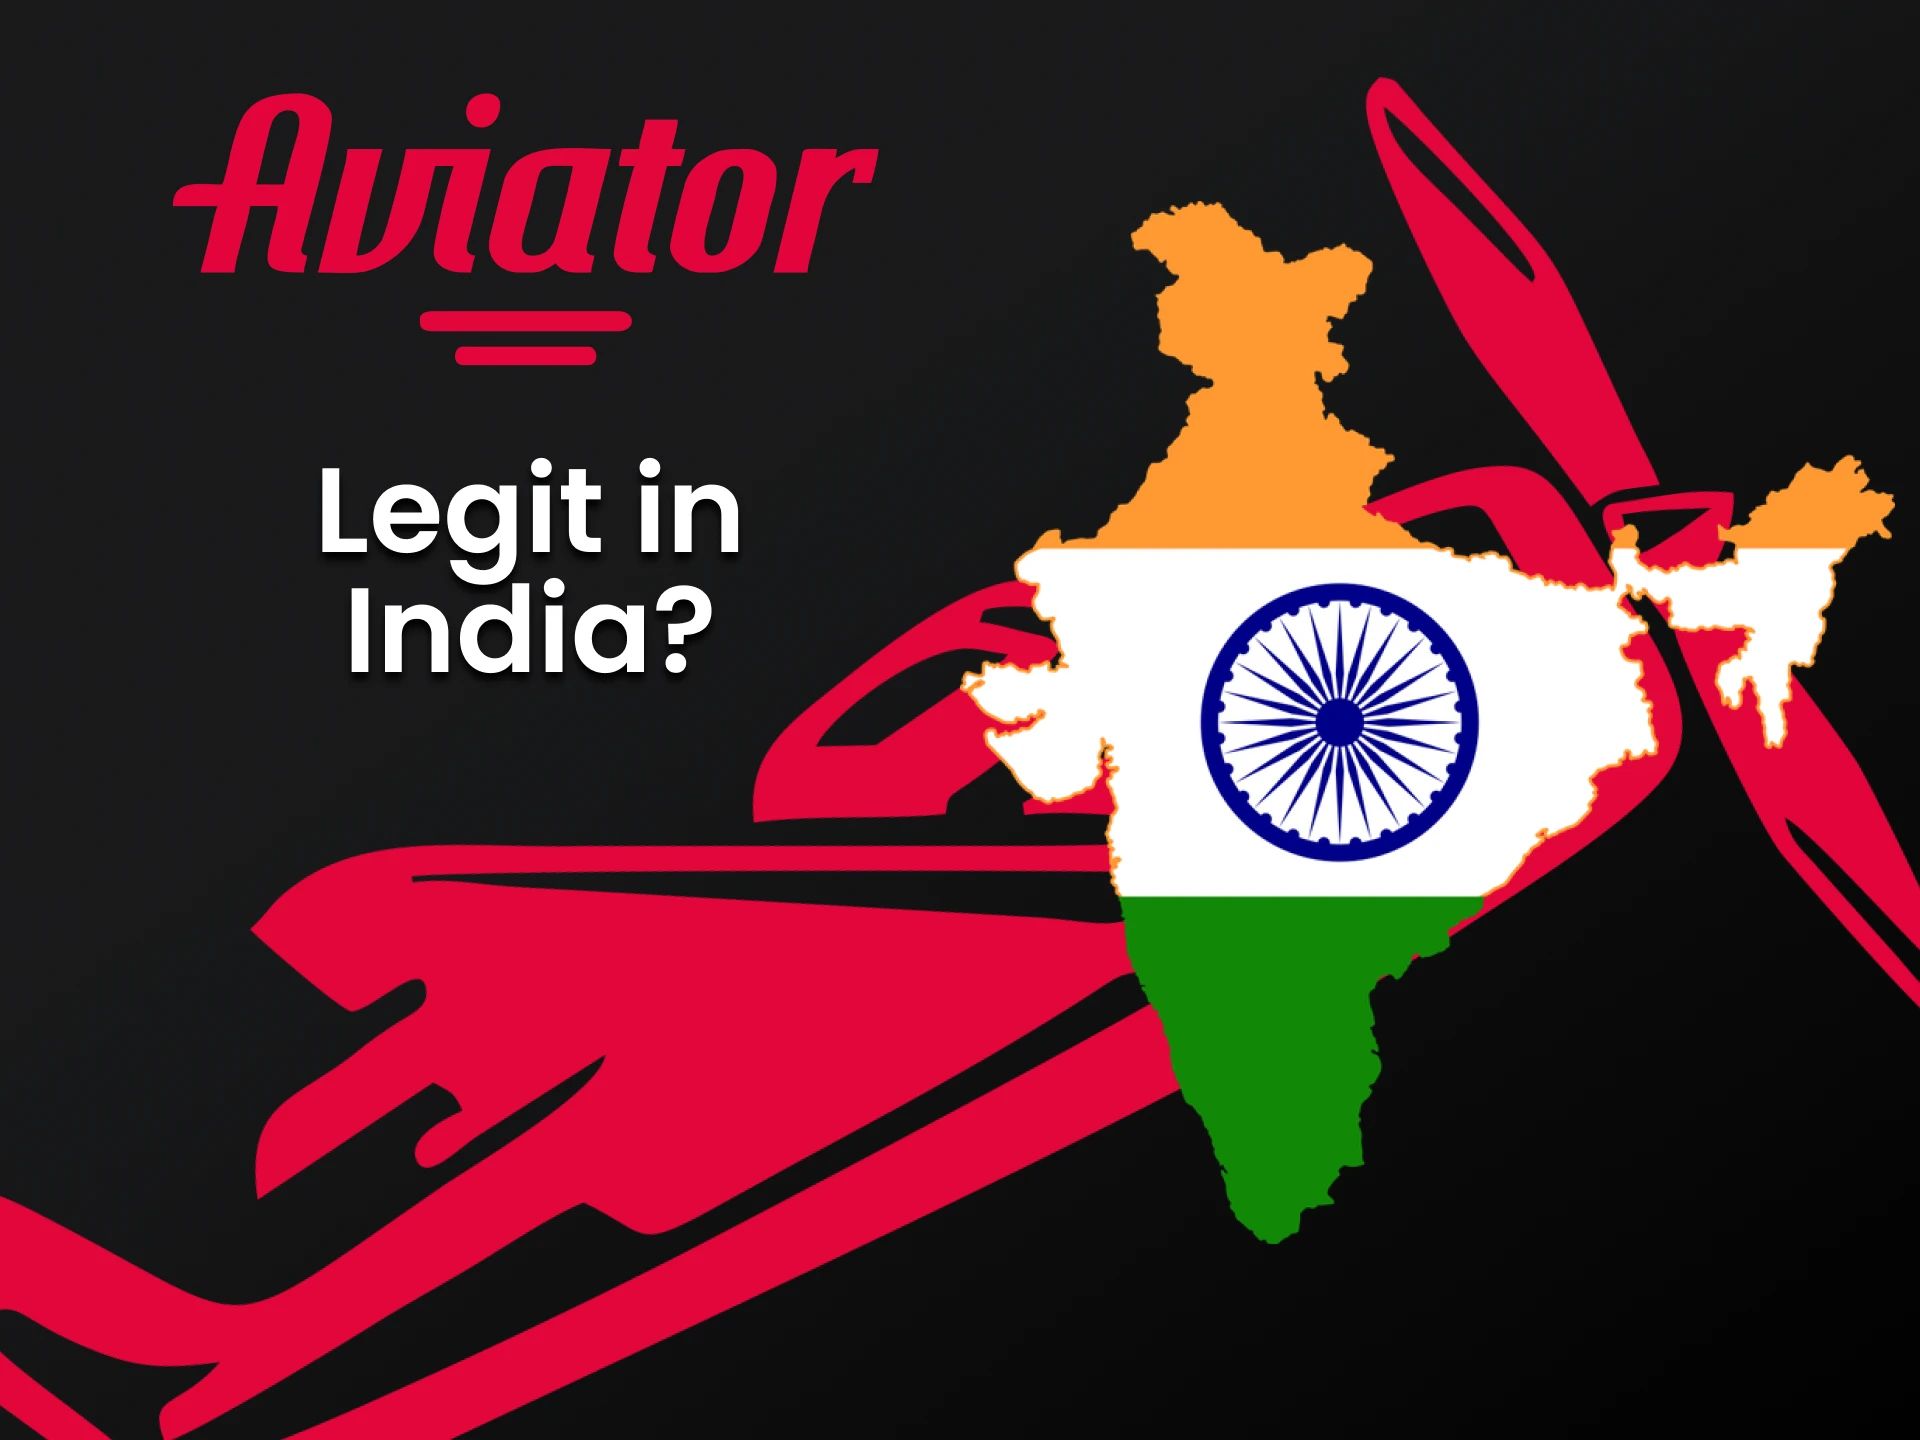 Aviator is legal for Indian players.